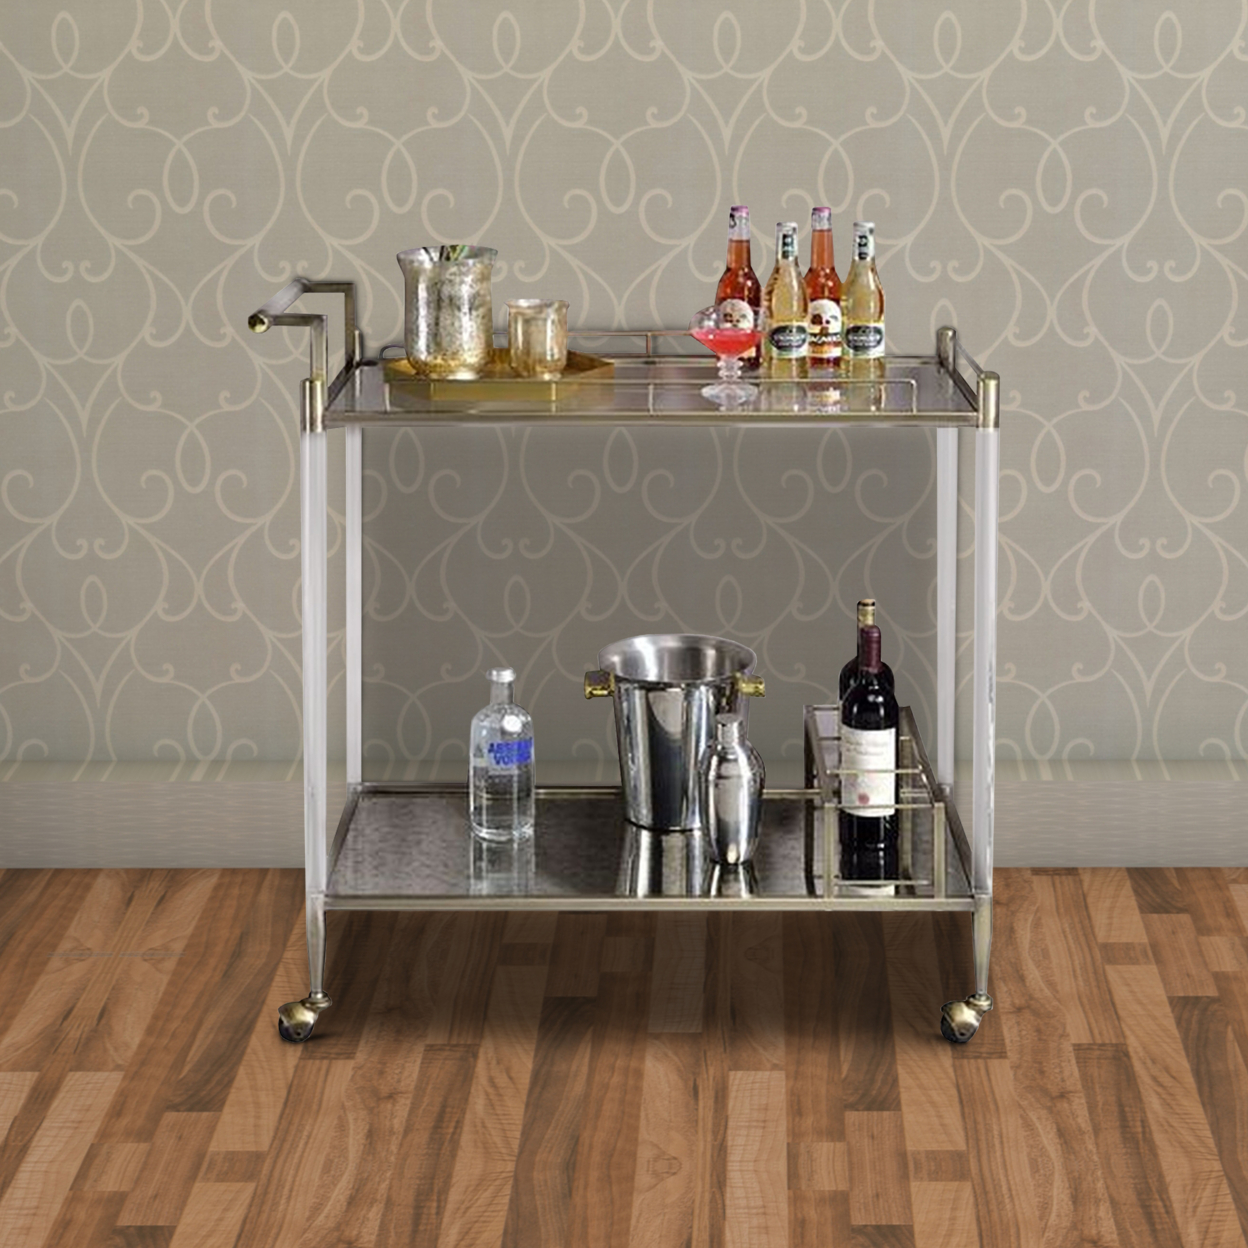 2 Tier Serving Cart With Acrylic And Metal Frame, Brass- Saltoro Sherpi